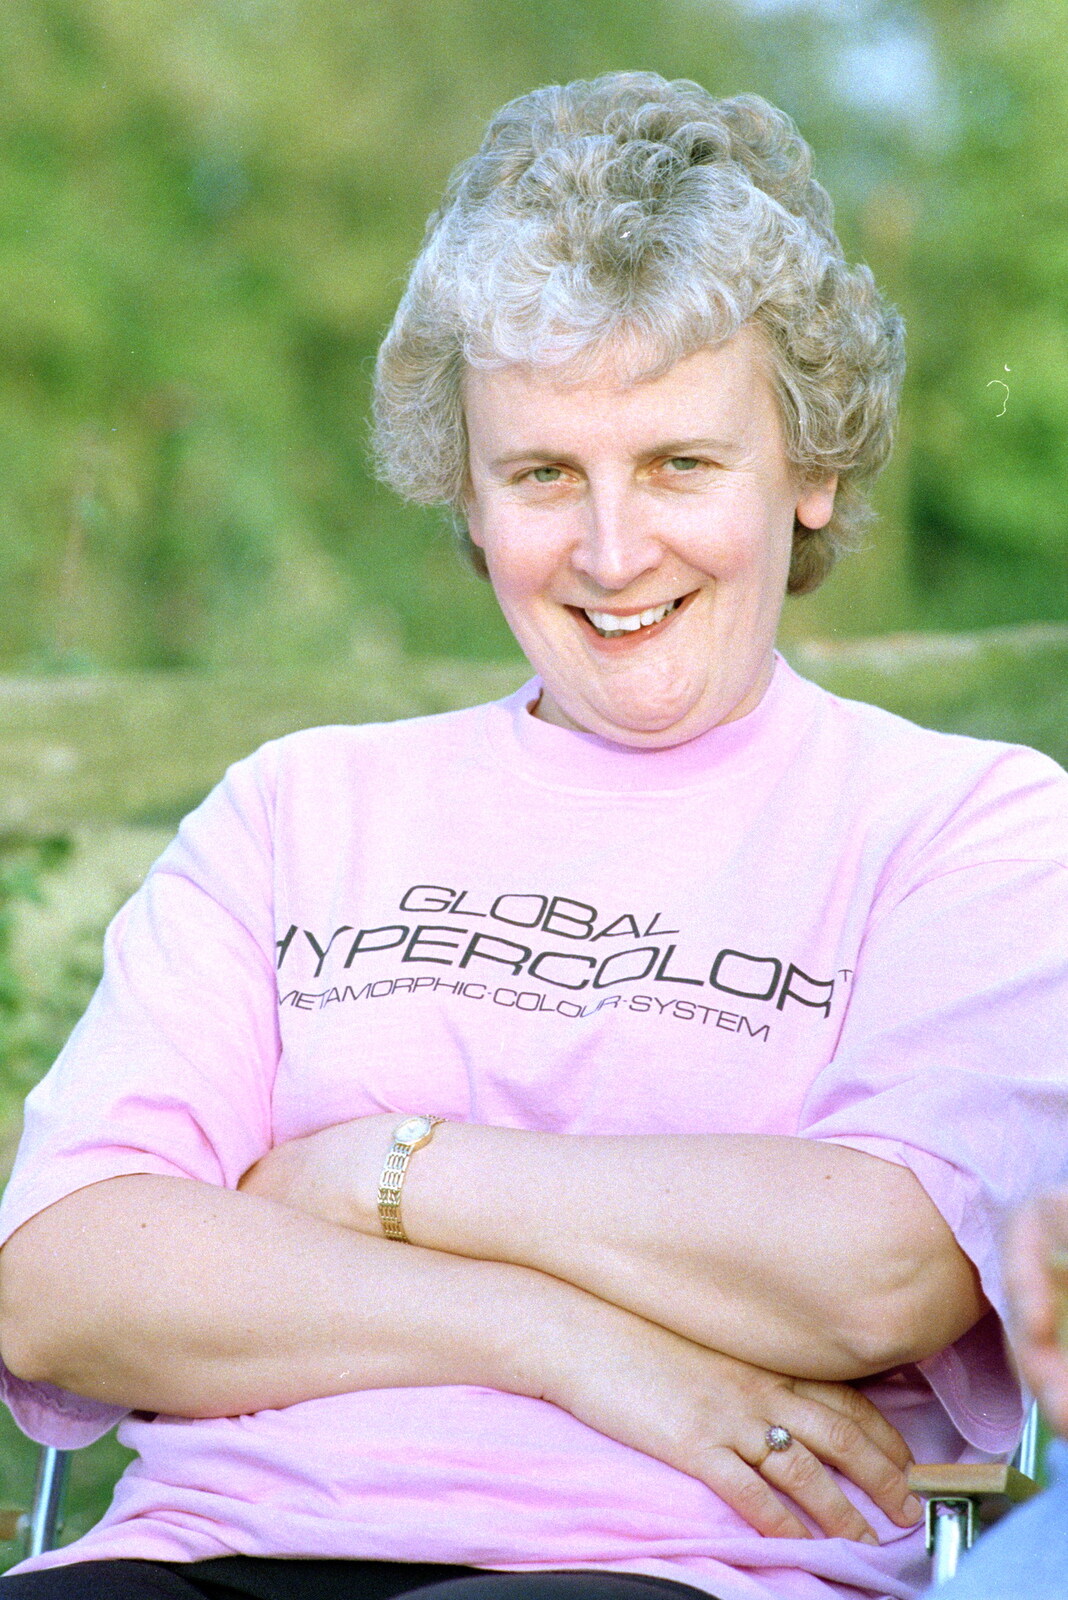 Linda in a peculiar tee-shirt from A Geoff and Brenda Barbeque, Stuston, Suffolk - 3rd April 1994